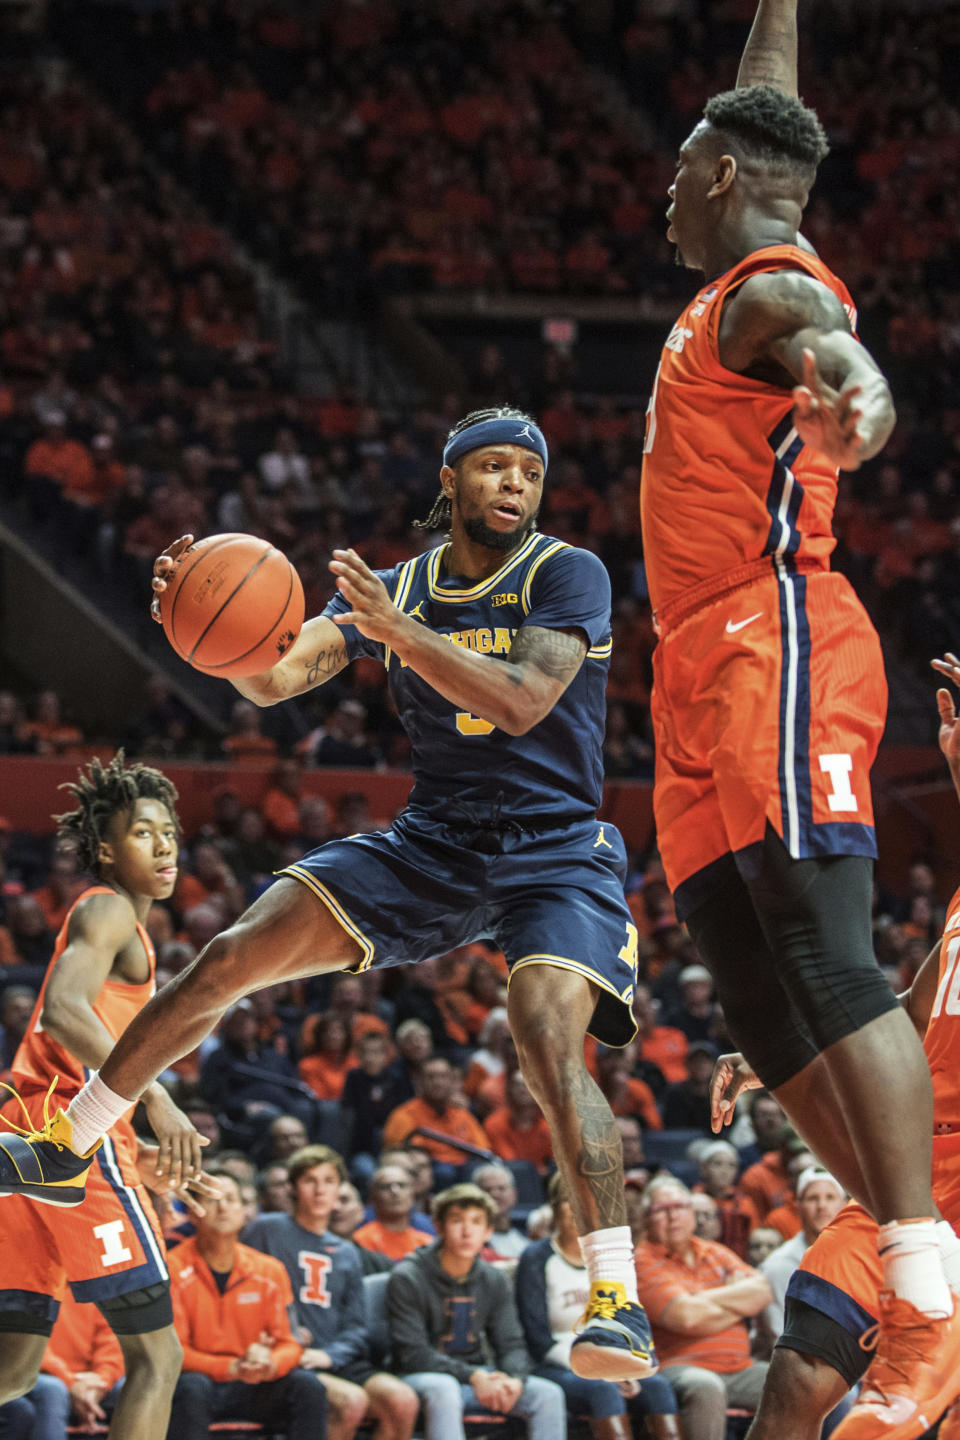 Michigan's Zavier Simpson (3) passes around Illinois defender Kofi Cockburn (21) in the second half of an NCAA college basketball game, Wednesday, Dec. 11, 2019, in Champaign, Ill. (AP Photo/Holly Hart)